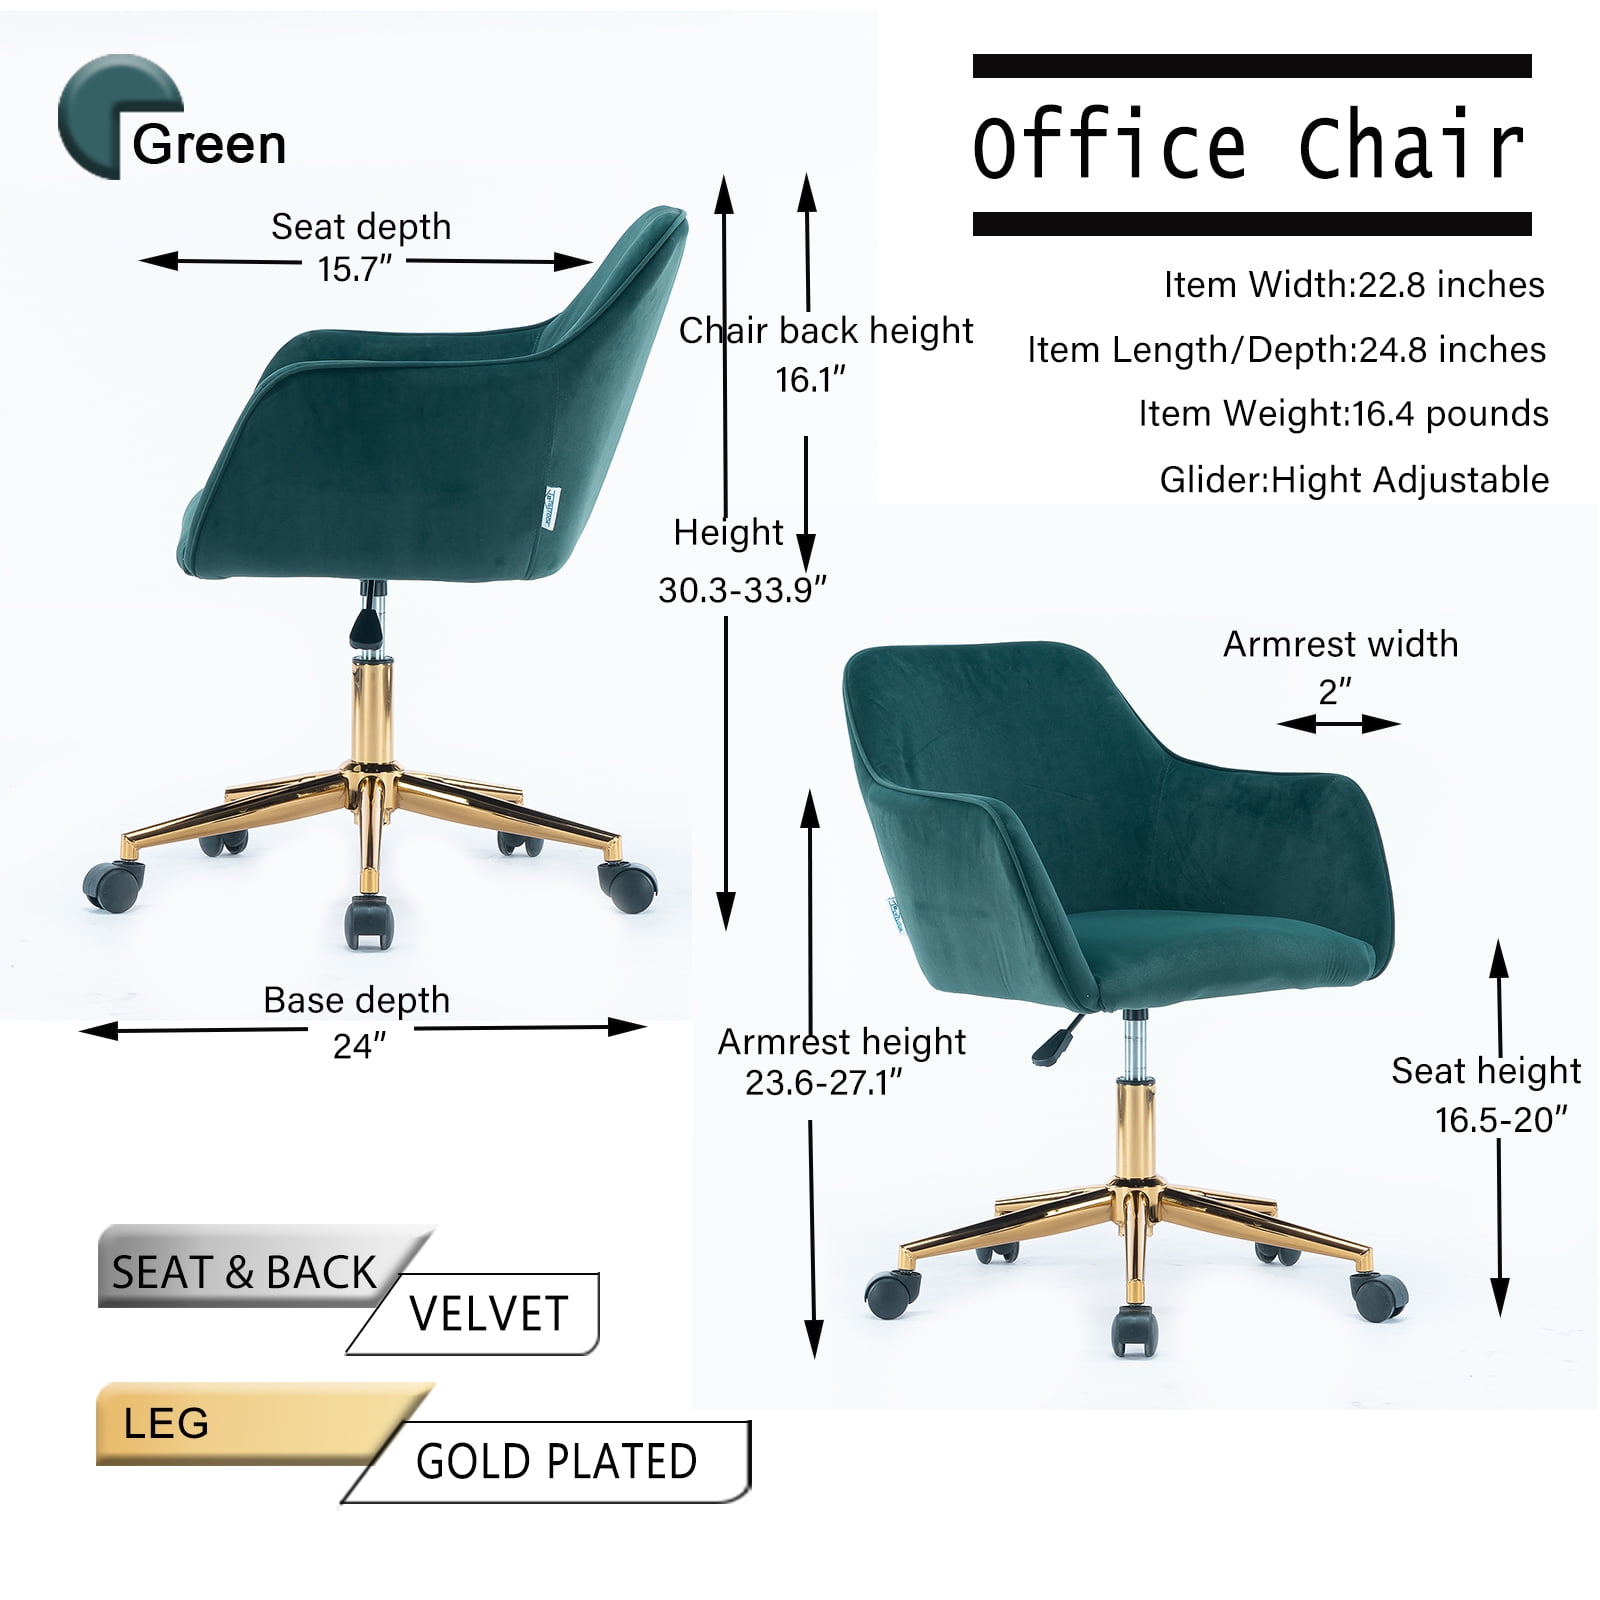 AVAWING Modern Velvet Home Office Computer Desk Task Chair W/Wheels  Mid-Back Adjustable Swivel with Arms Green Chair 